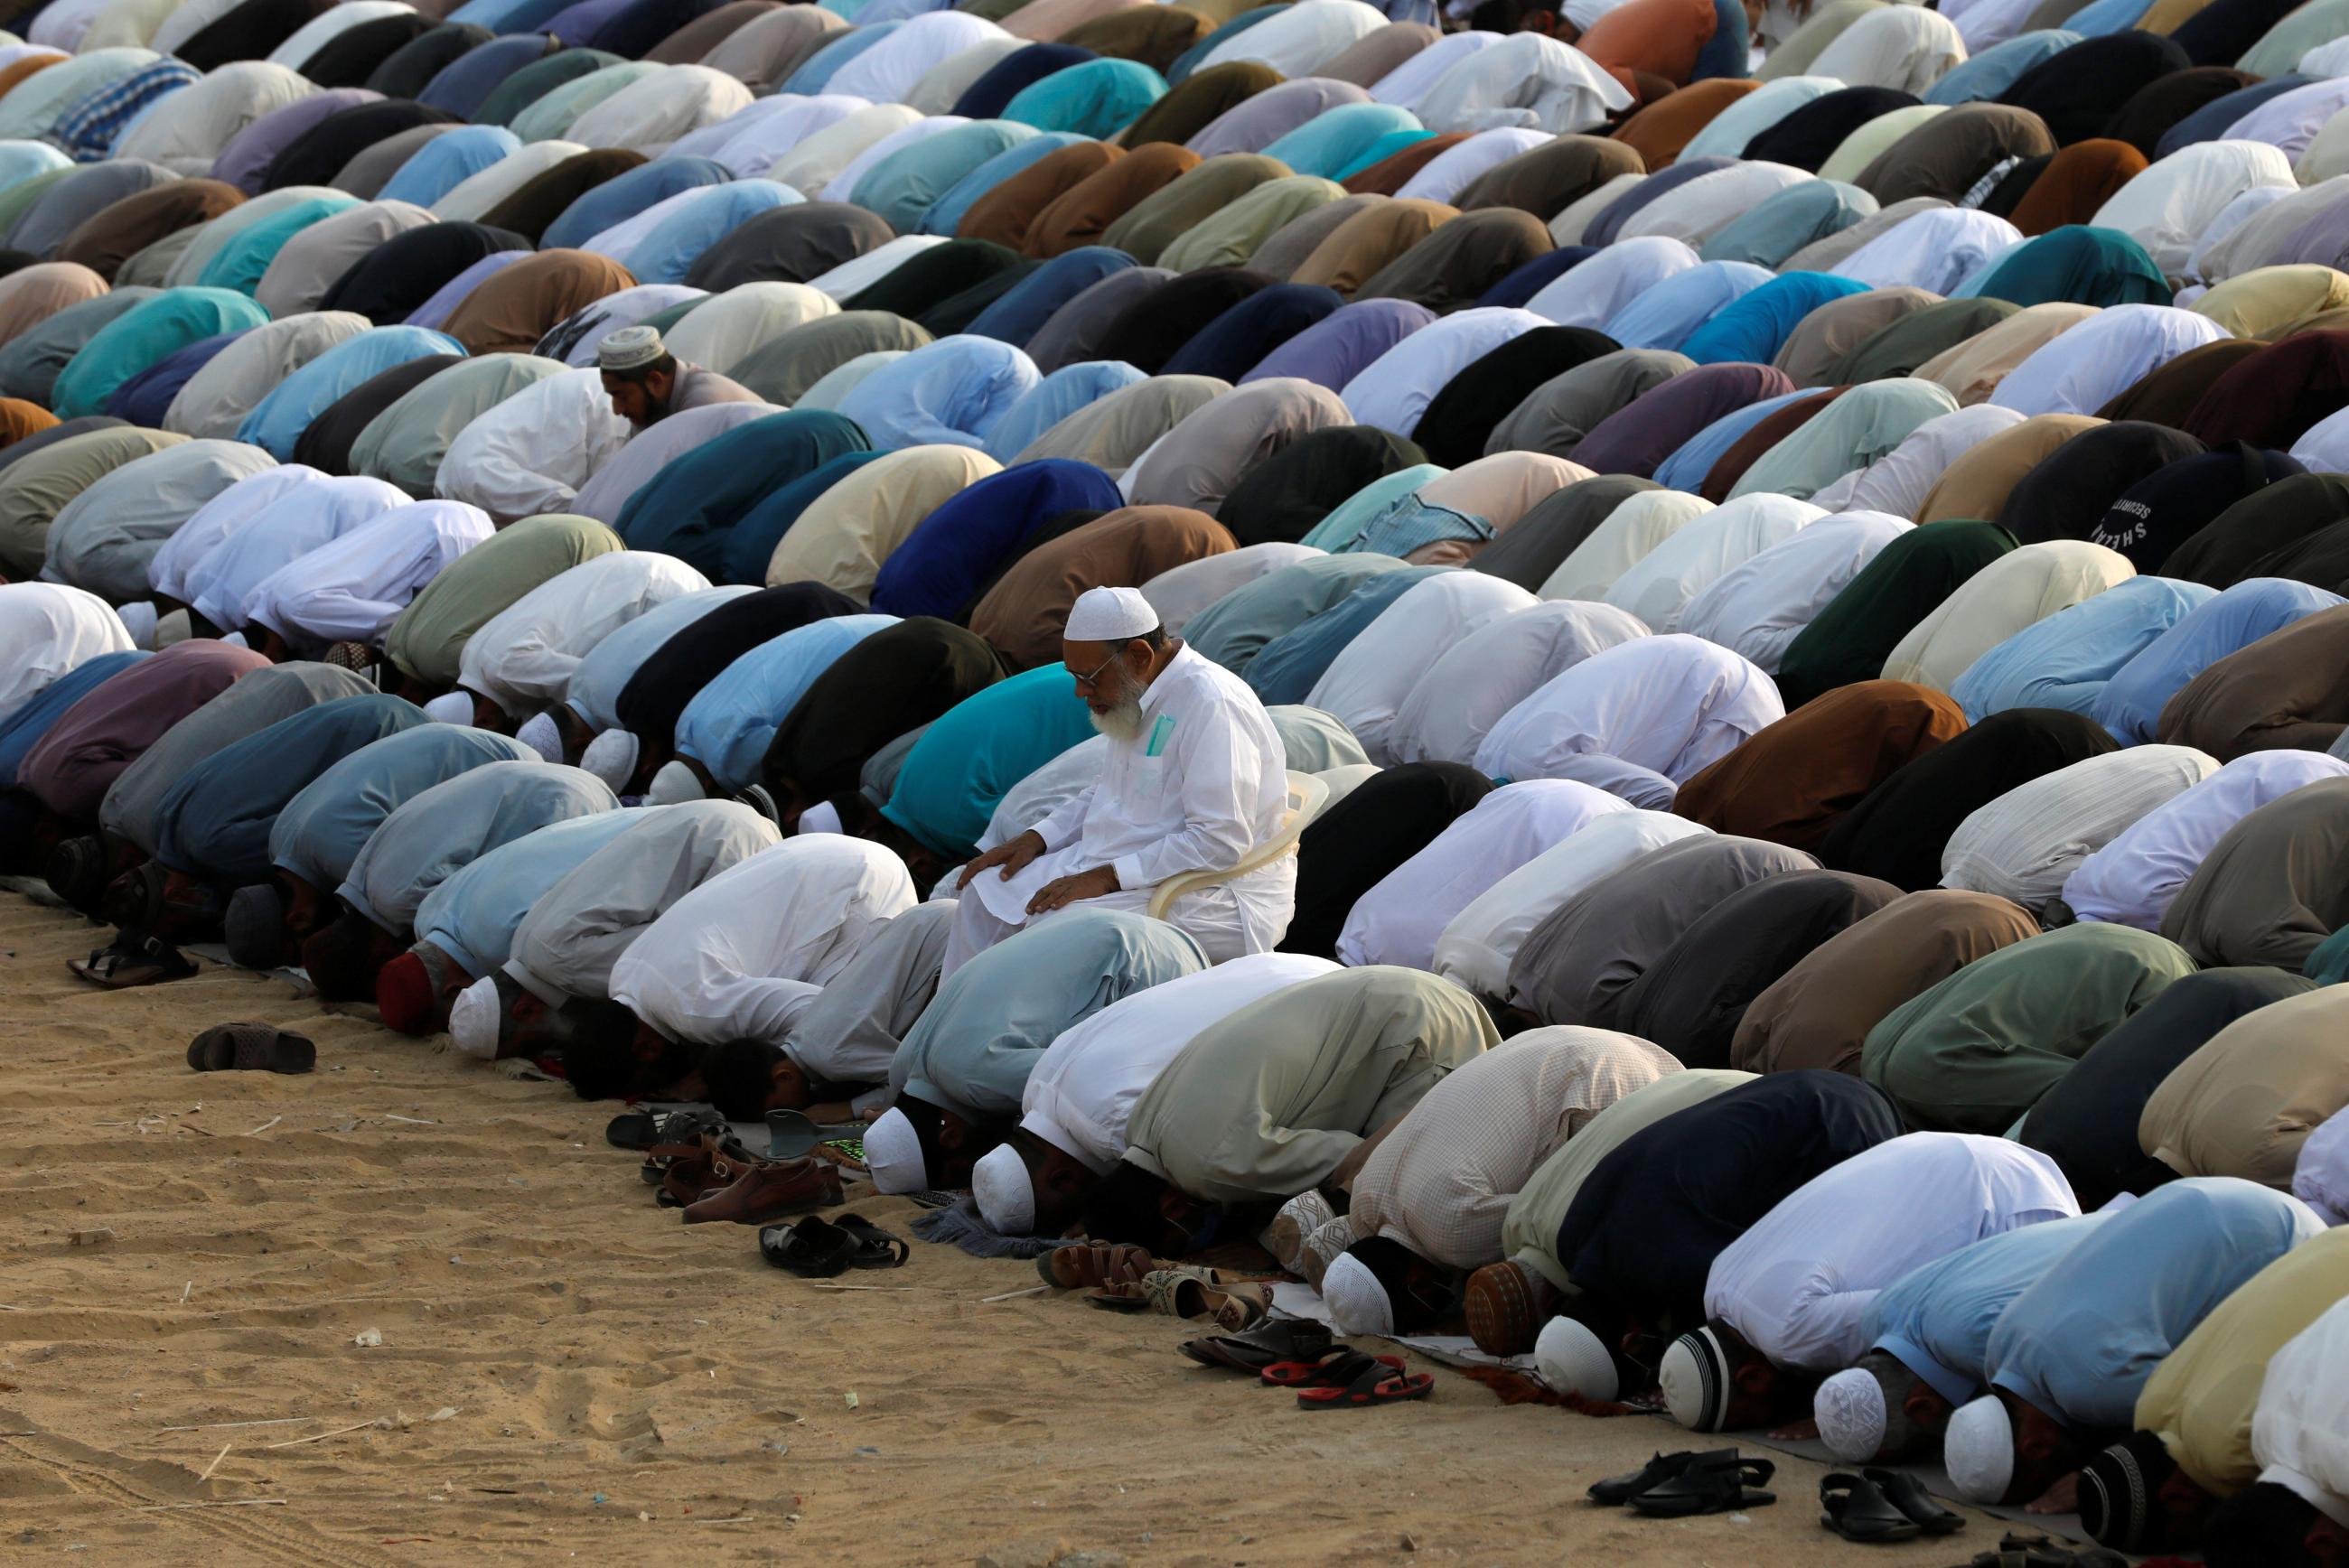 Muslims bend forward in prayer celebrating Eid al-Fitr, marking the end of the holy fasting month of Ramadan during the COVID-19 pandemic in Karachi, Pakistan, on May 13, 2021. 